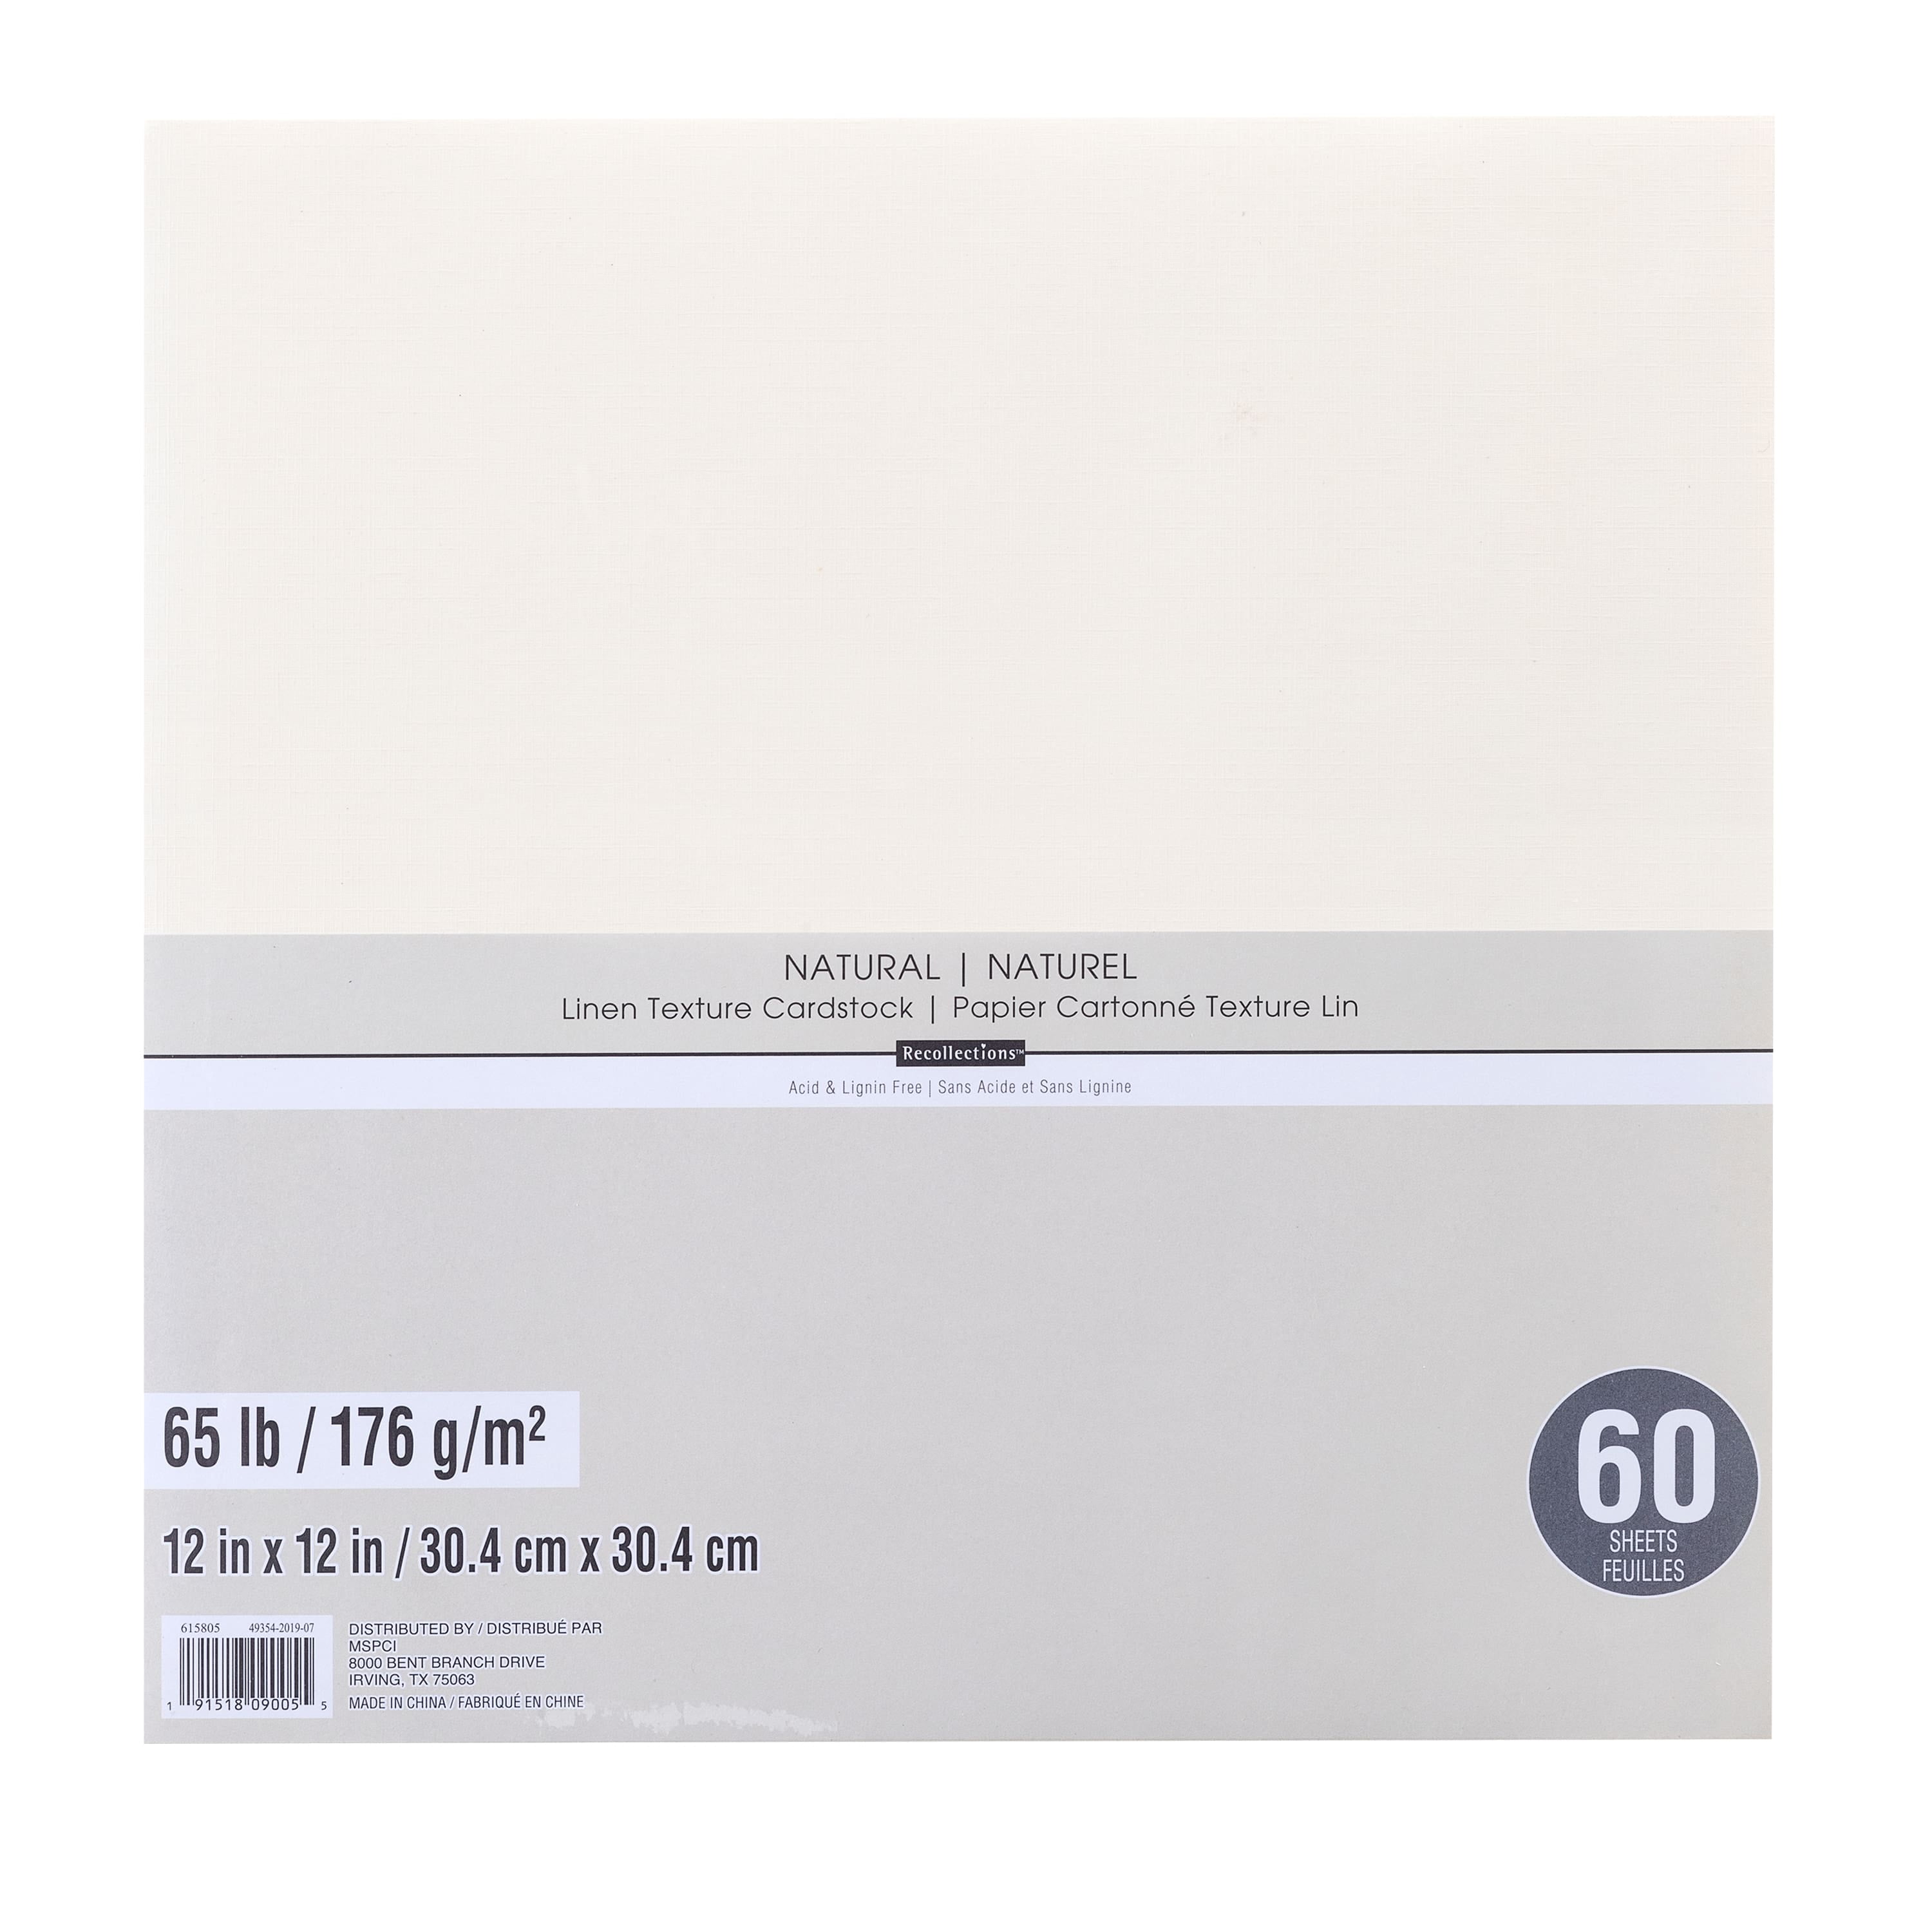 American Crafts Textured Cardstock Pack - 12 x 12, White, 25 Sheets